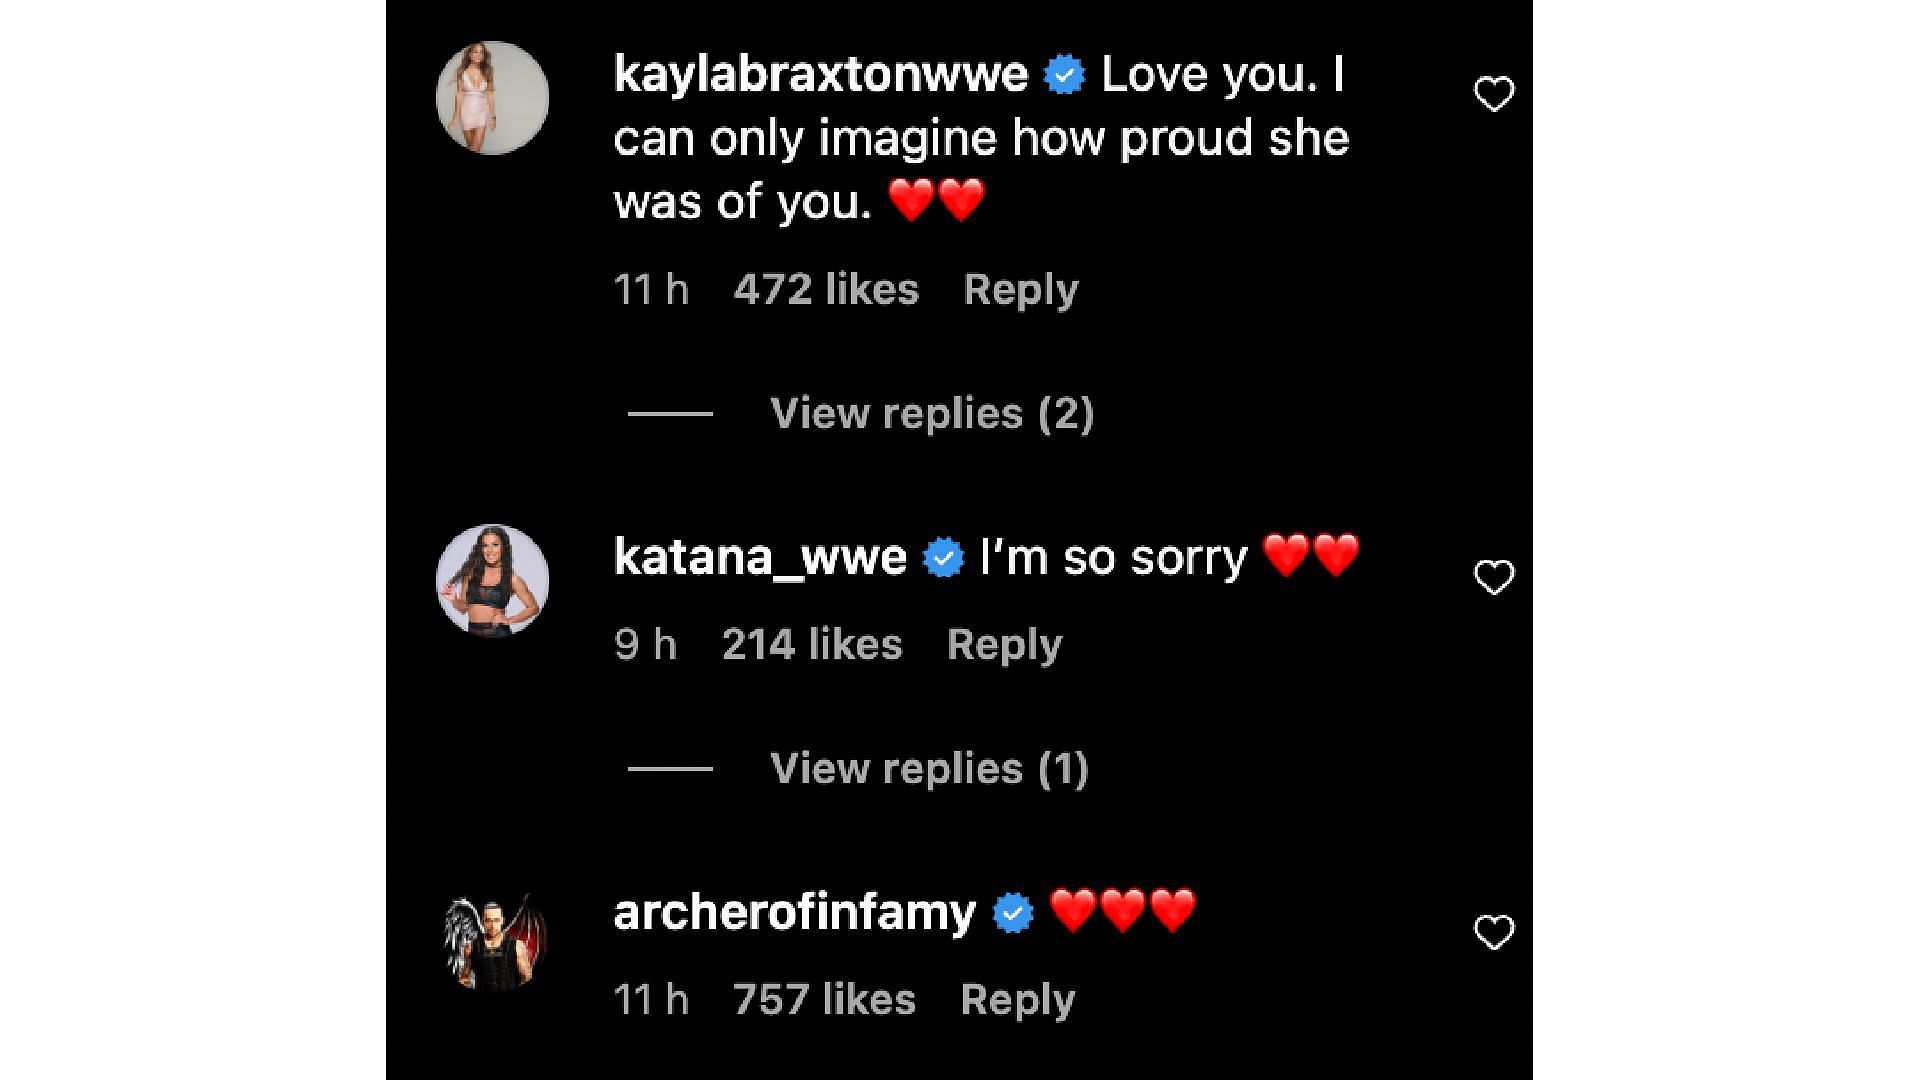 Kayla Braxton, NXT star Katana Chance, and fellow Judgment Day member Damian Priest all reacted to the tragic loss